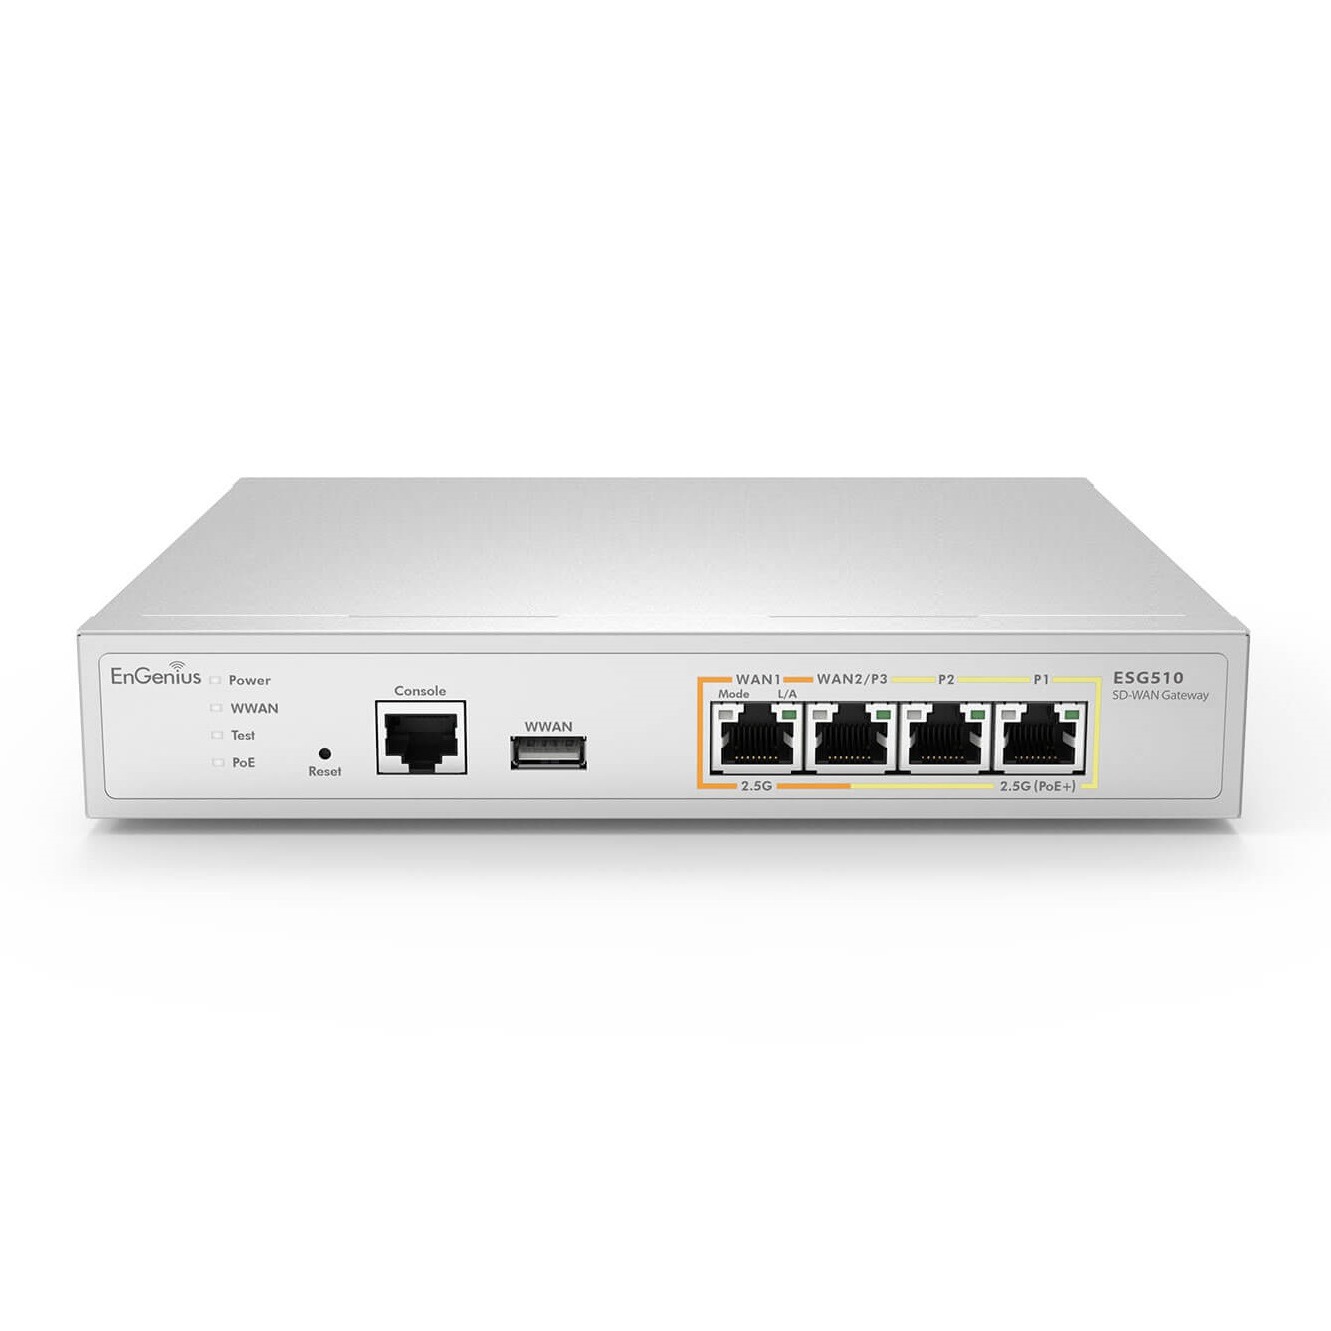 Cloud Managed SD-WAN Security Gateway with Quad Core 1.6GHz and 4x 2.5G ports